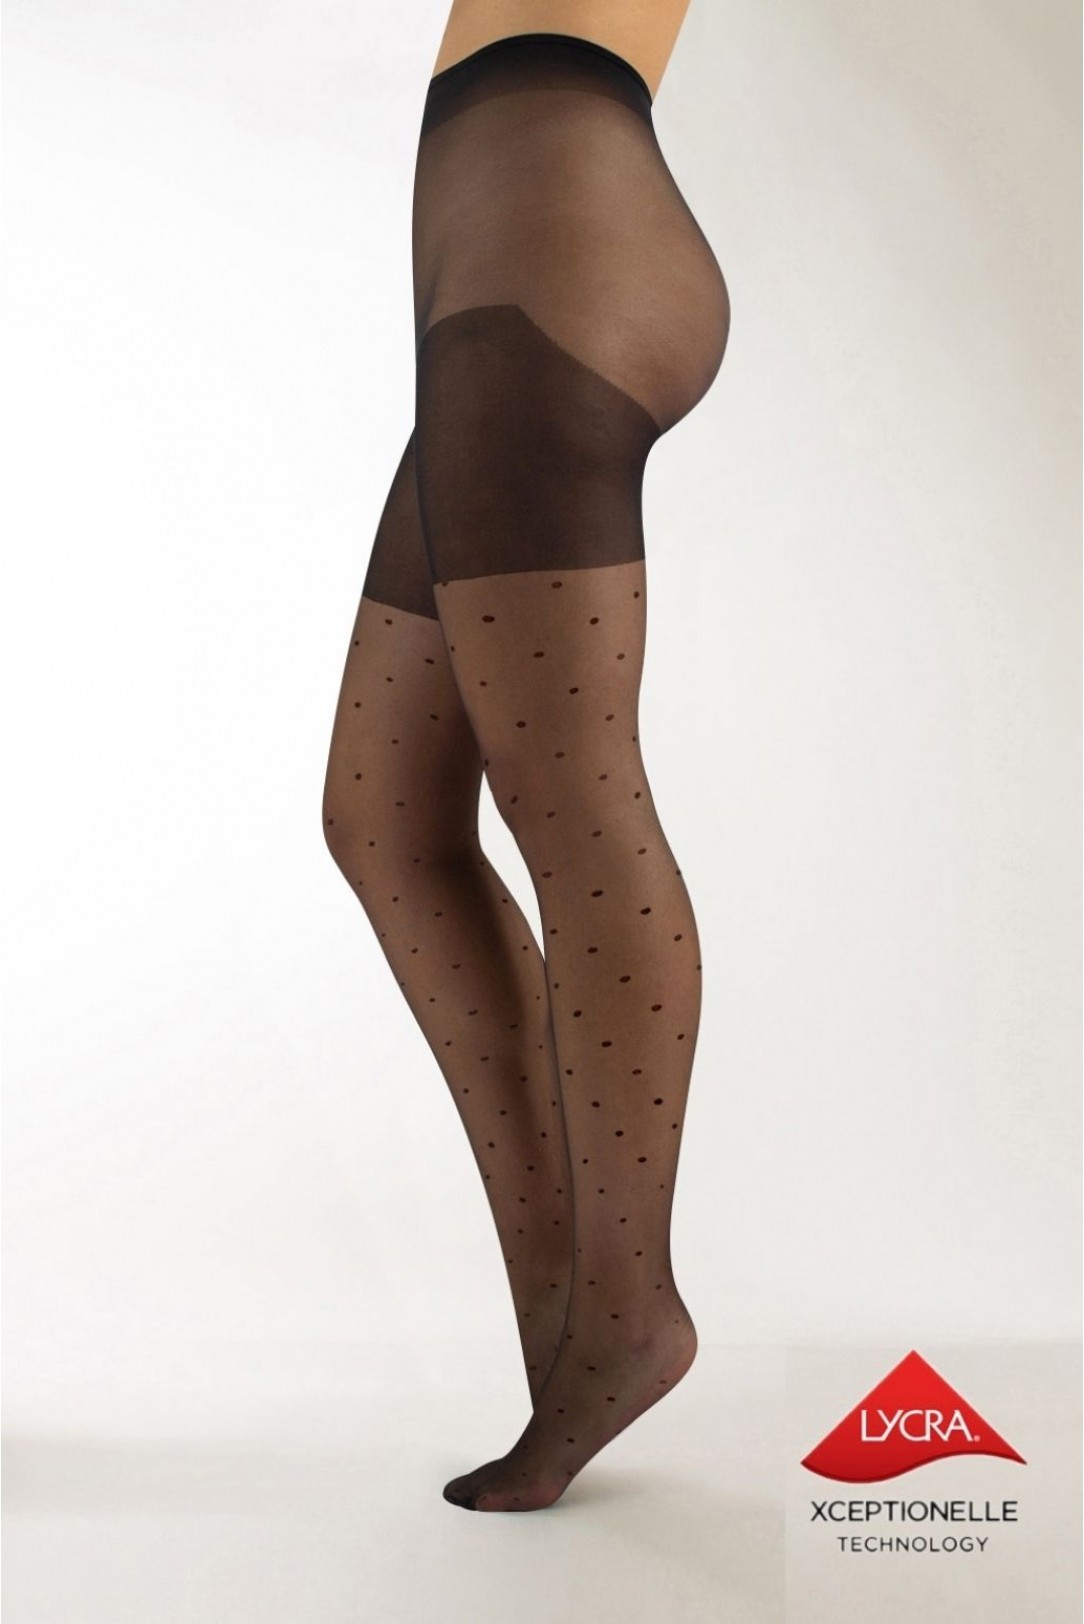 Luxury Black Sheer Dotted Tights Pantyhose for all Women Plus Size